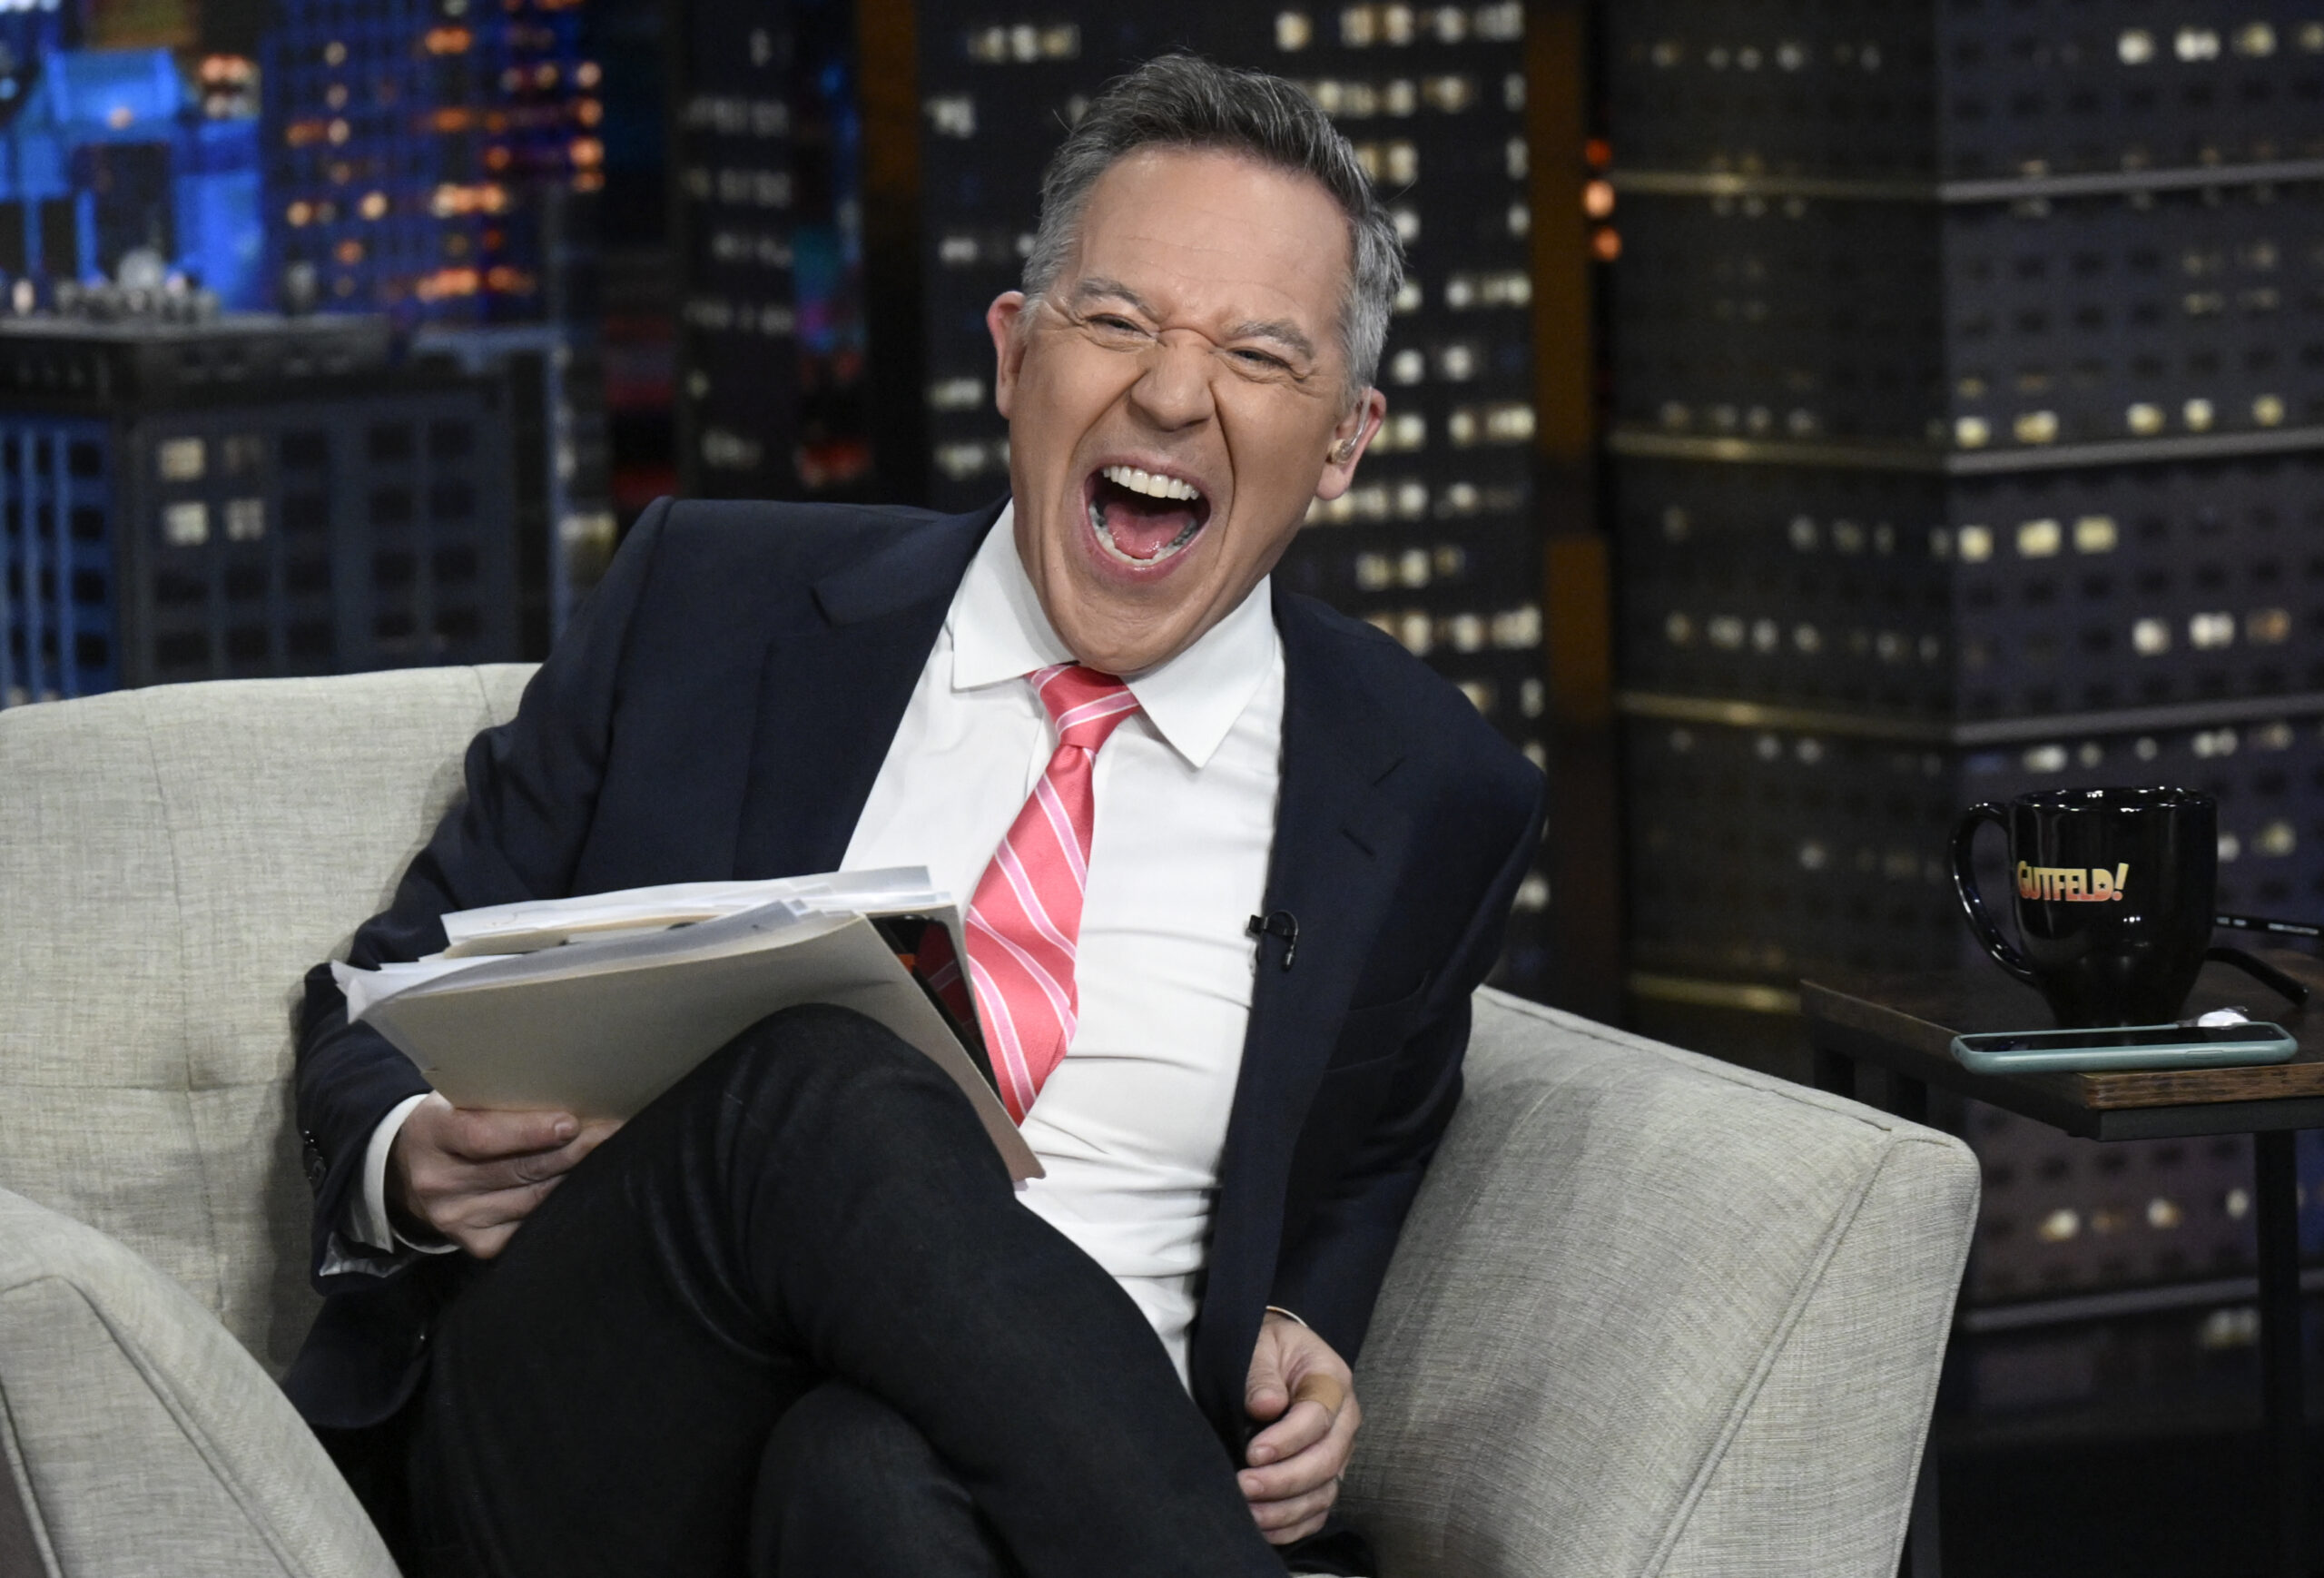 Super Bowl 2023 Greg Gutfeld to star as ‘new king of late night’ in